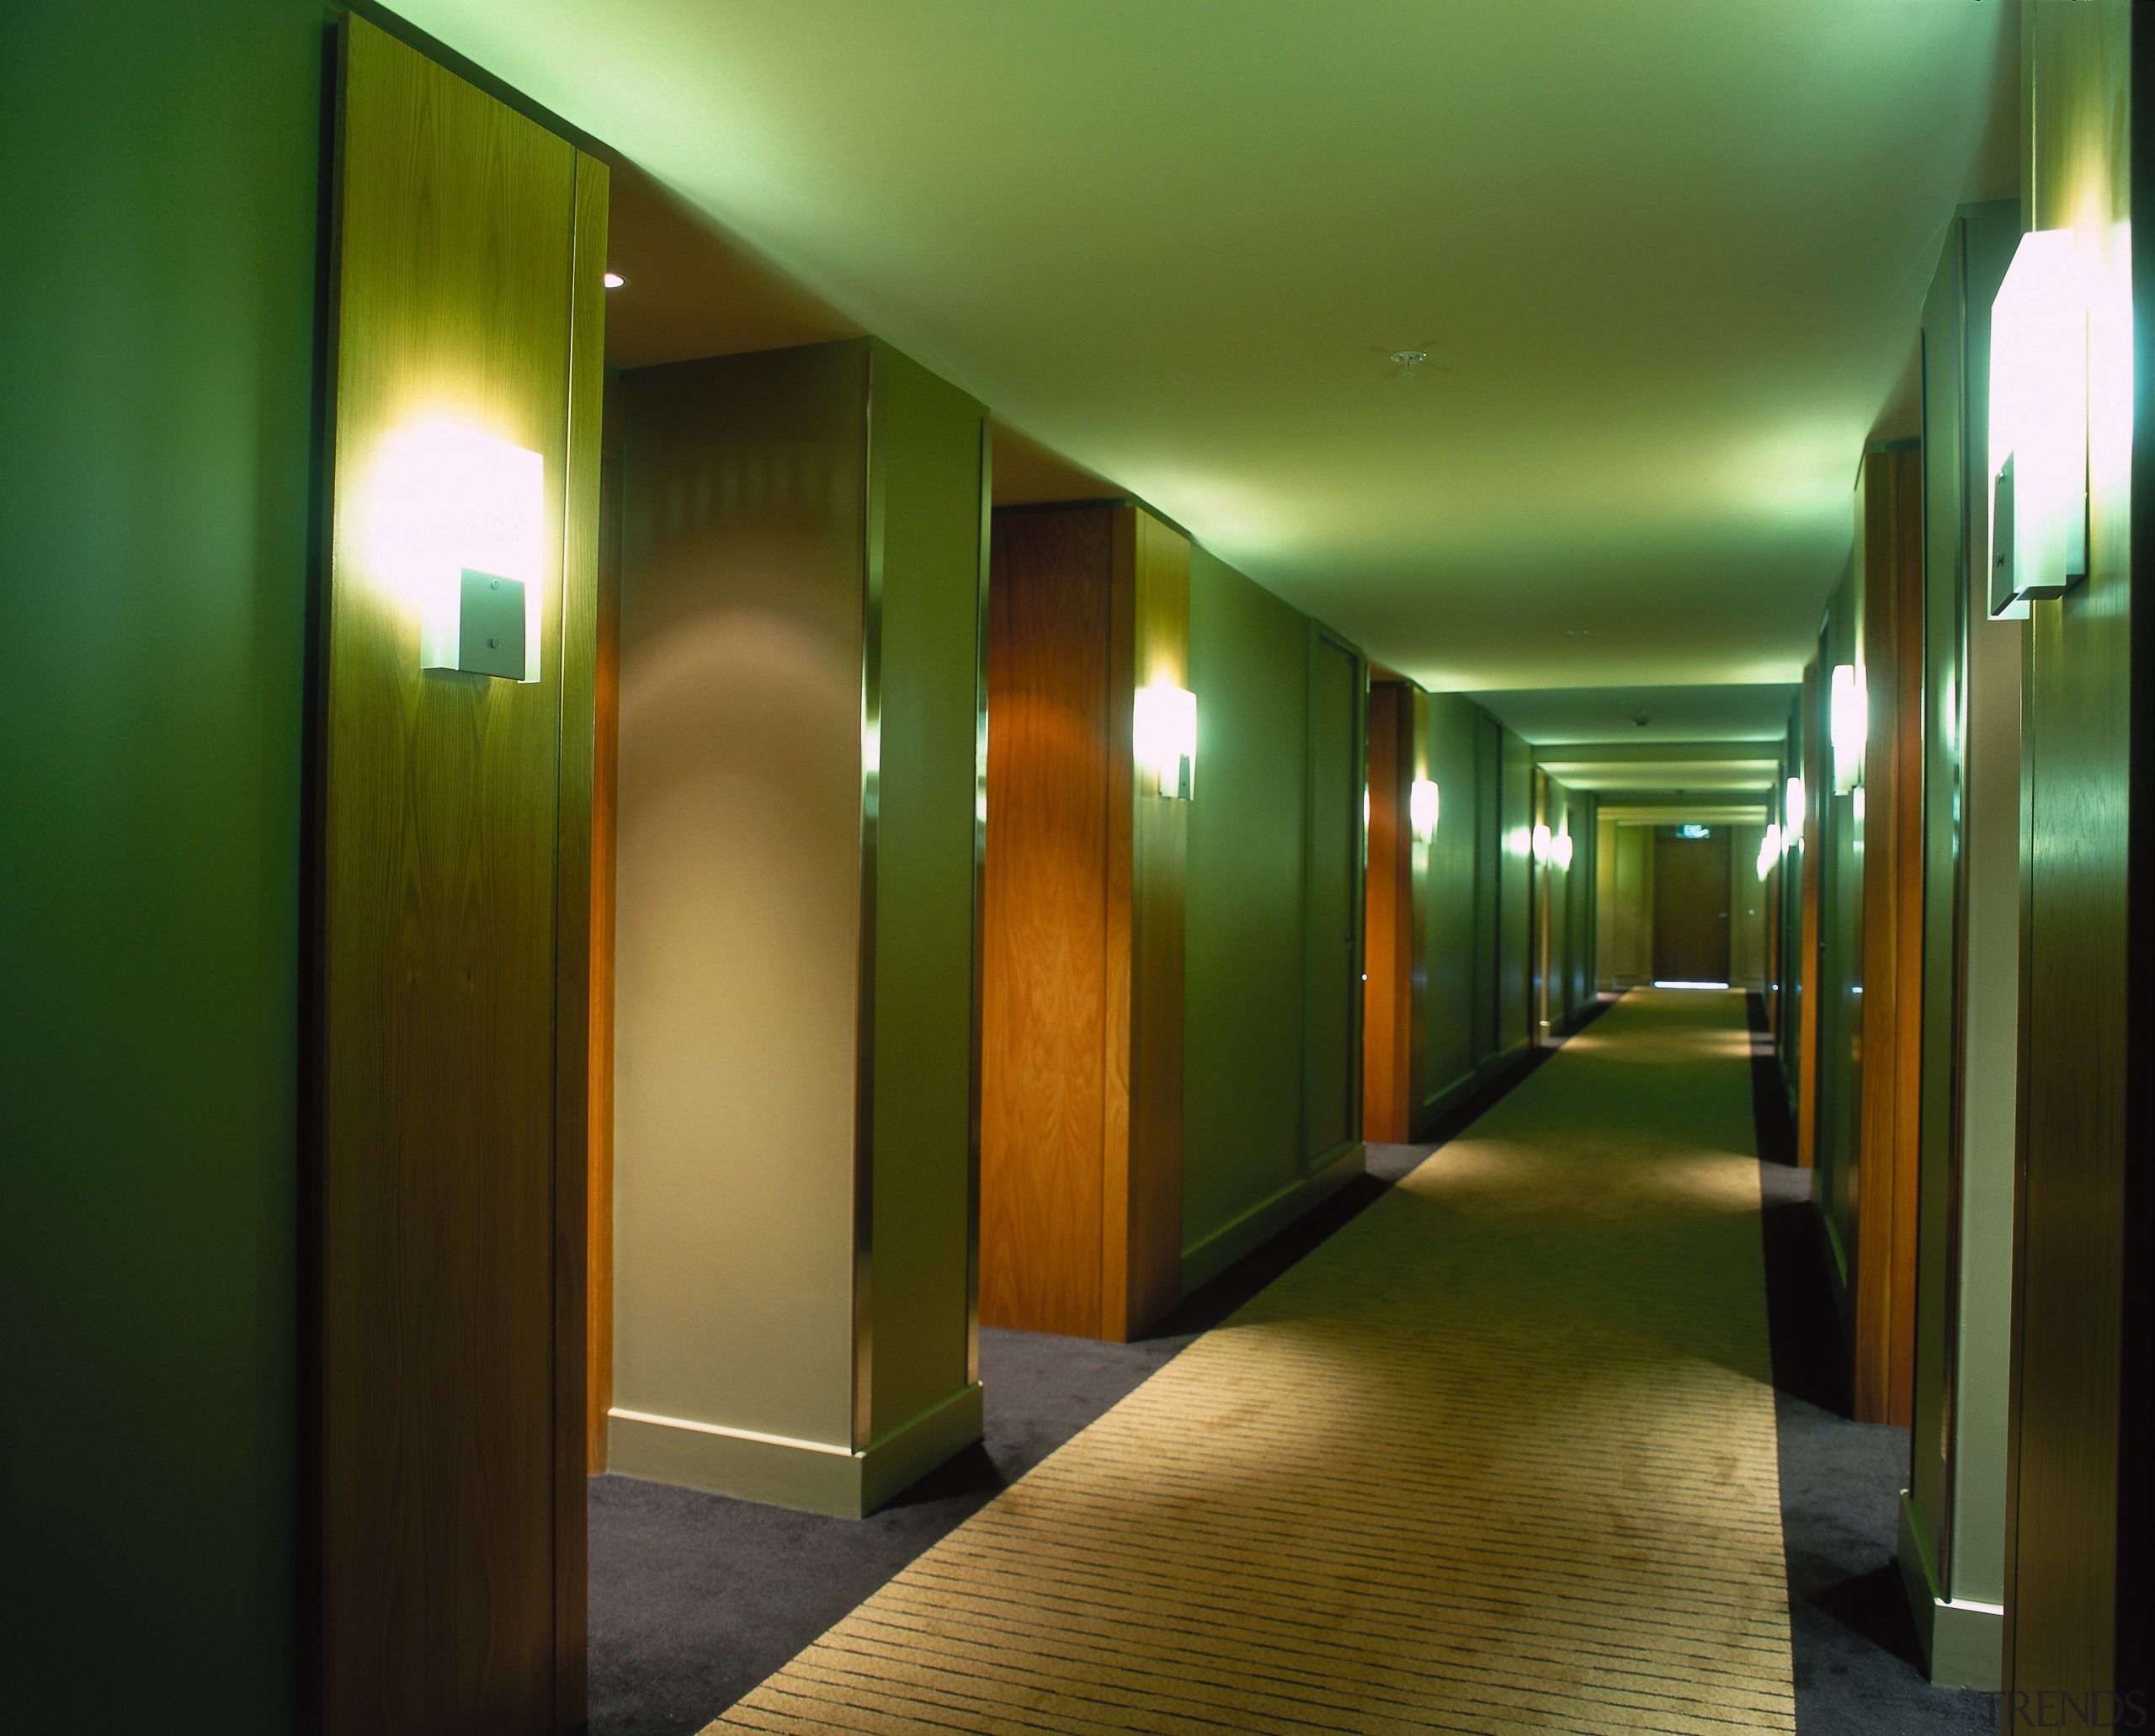 Corridor with veneer wall panels with solid timber architecture, ceiling, hall, interior design, lighting, lobby, brown, green